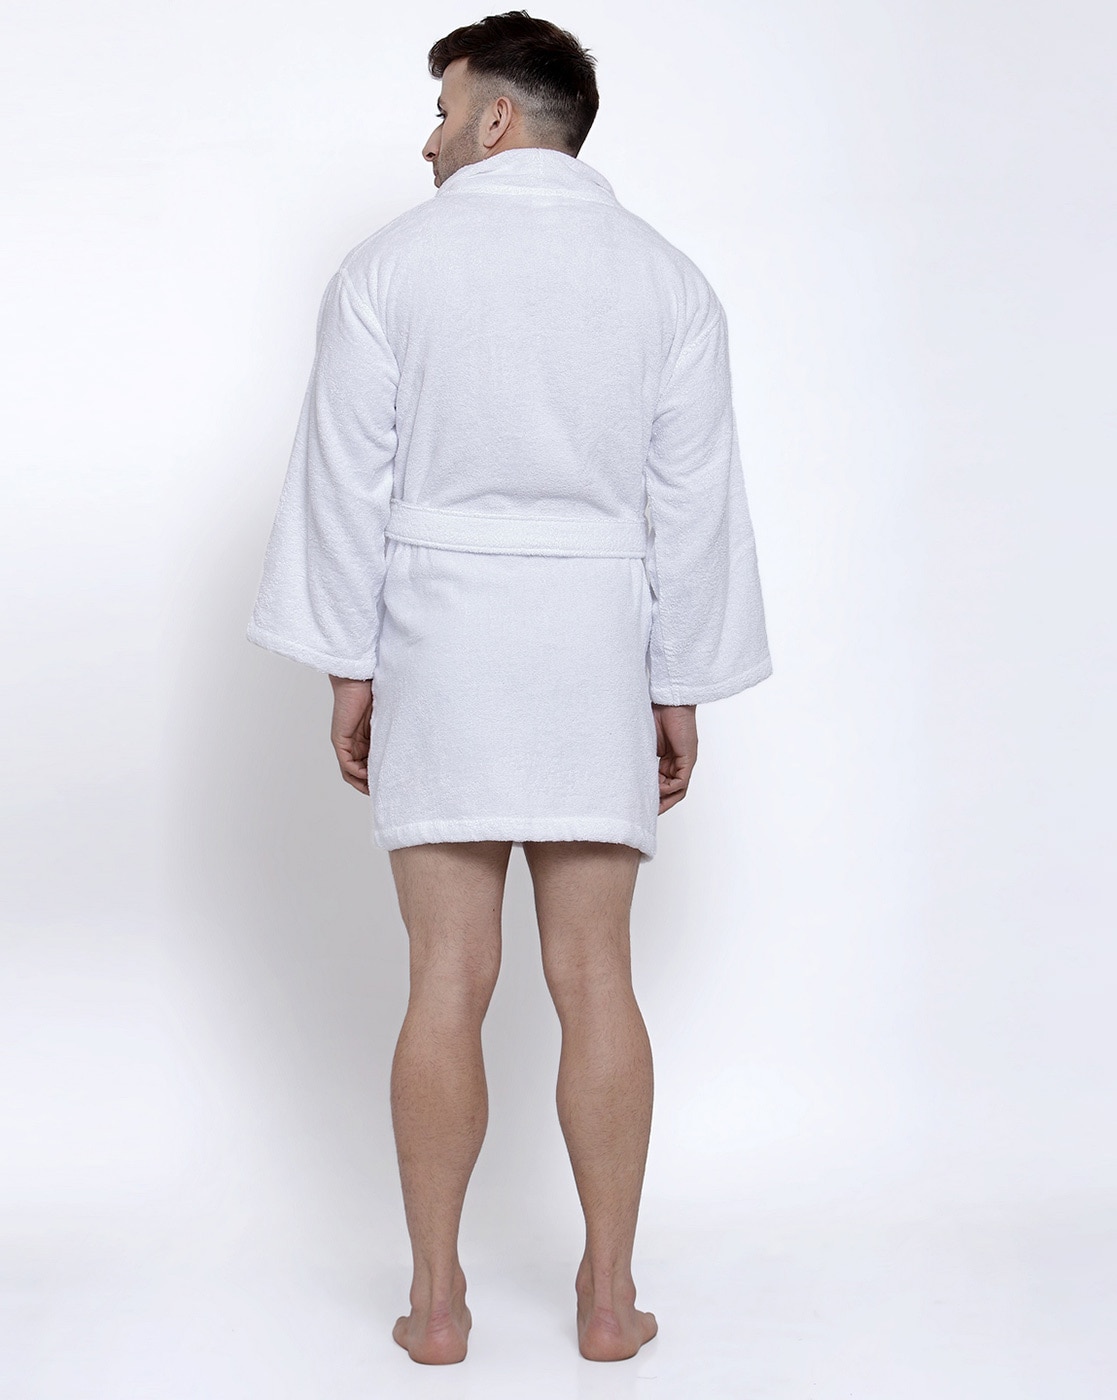 Low Cost Luxury Terry Towelling Bath Robes Super Quality With Price Promise  Guarantee